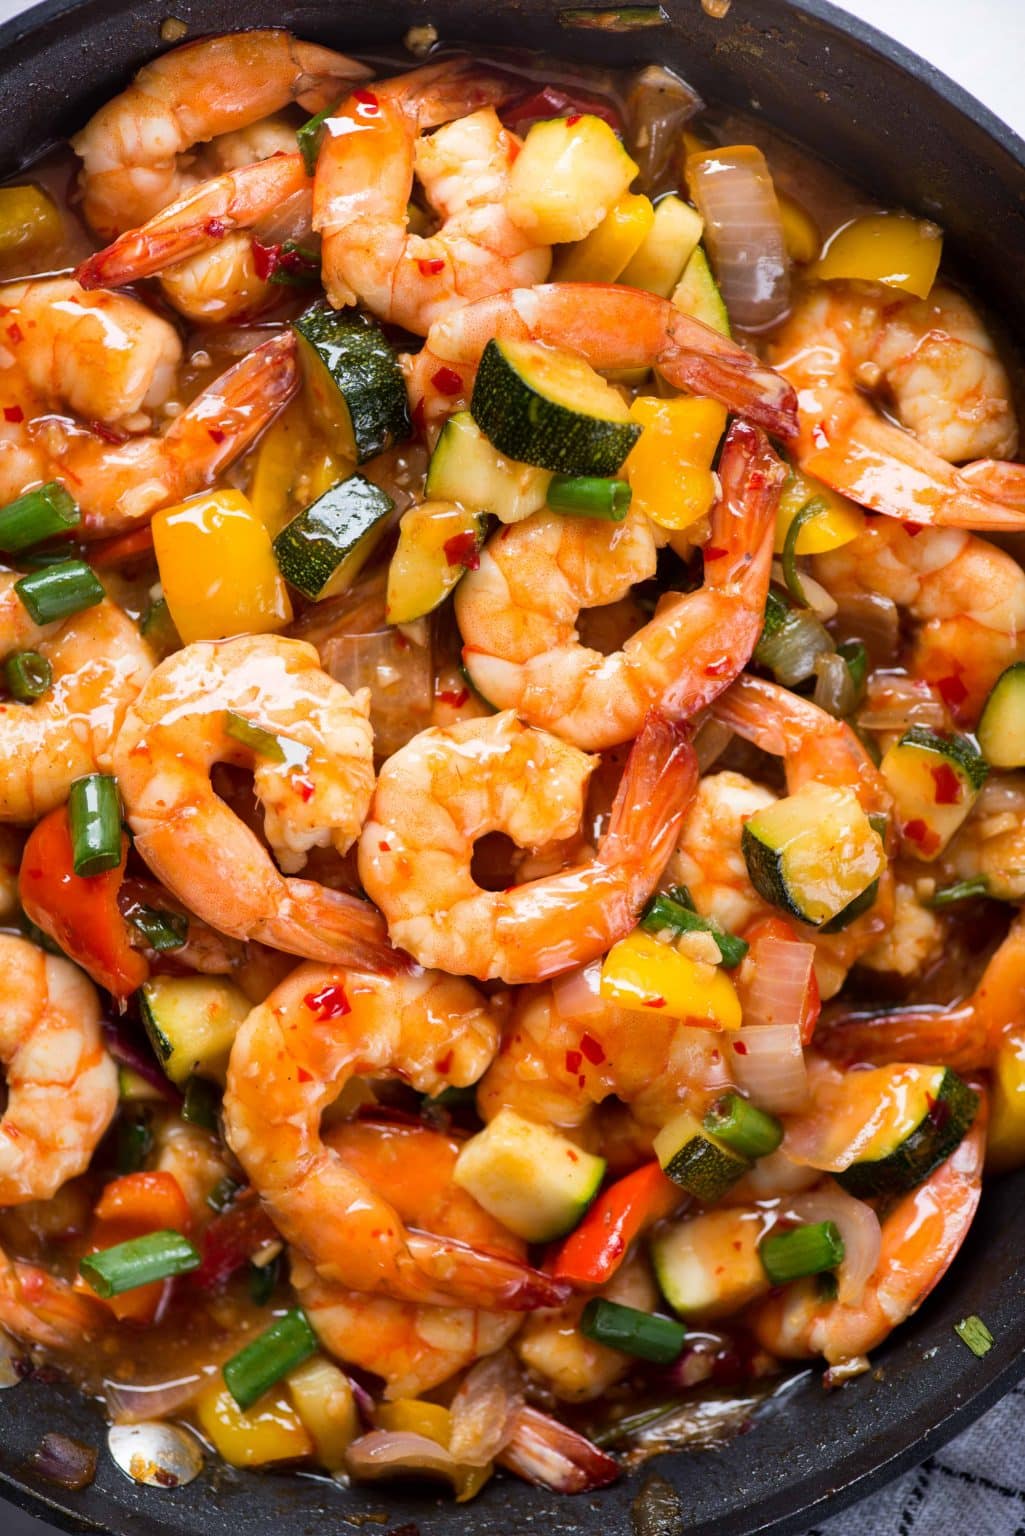 Sweet Chili Shrimp Stir Fry - The flavours of kitchen